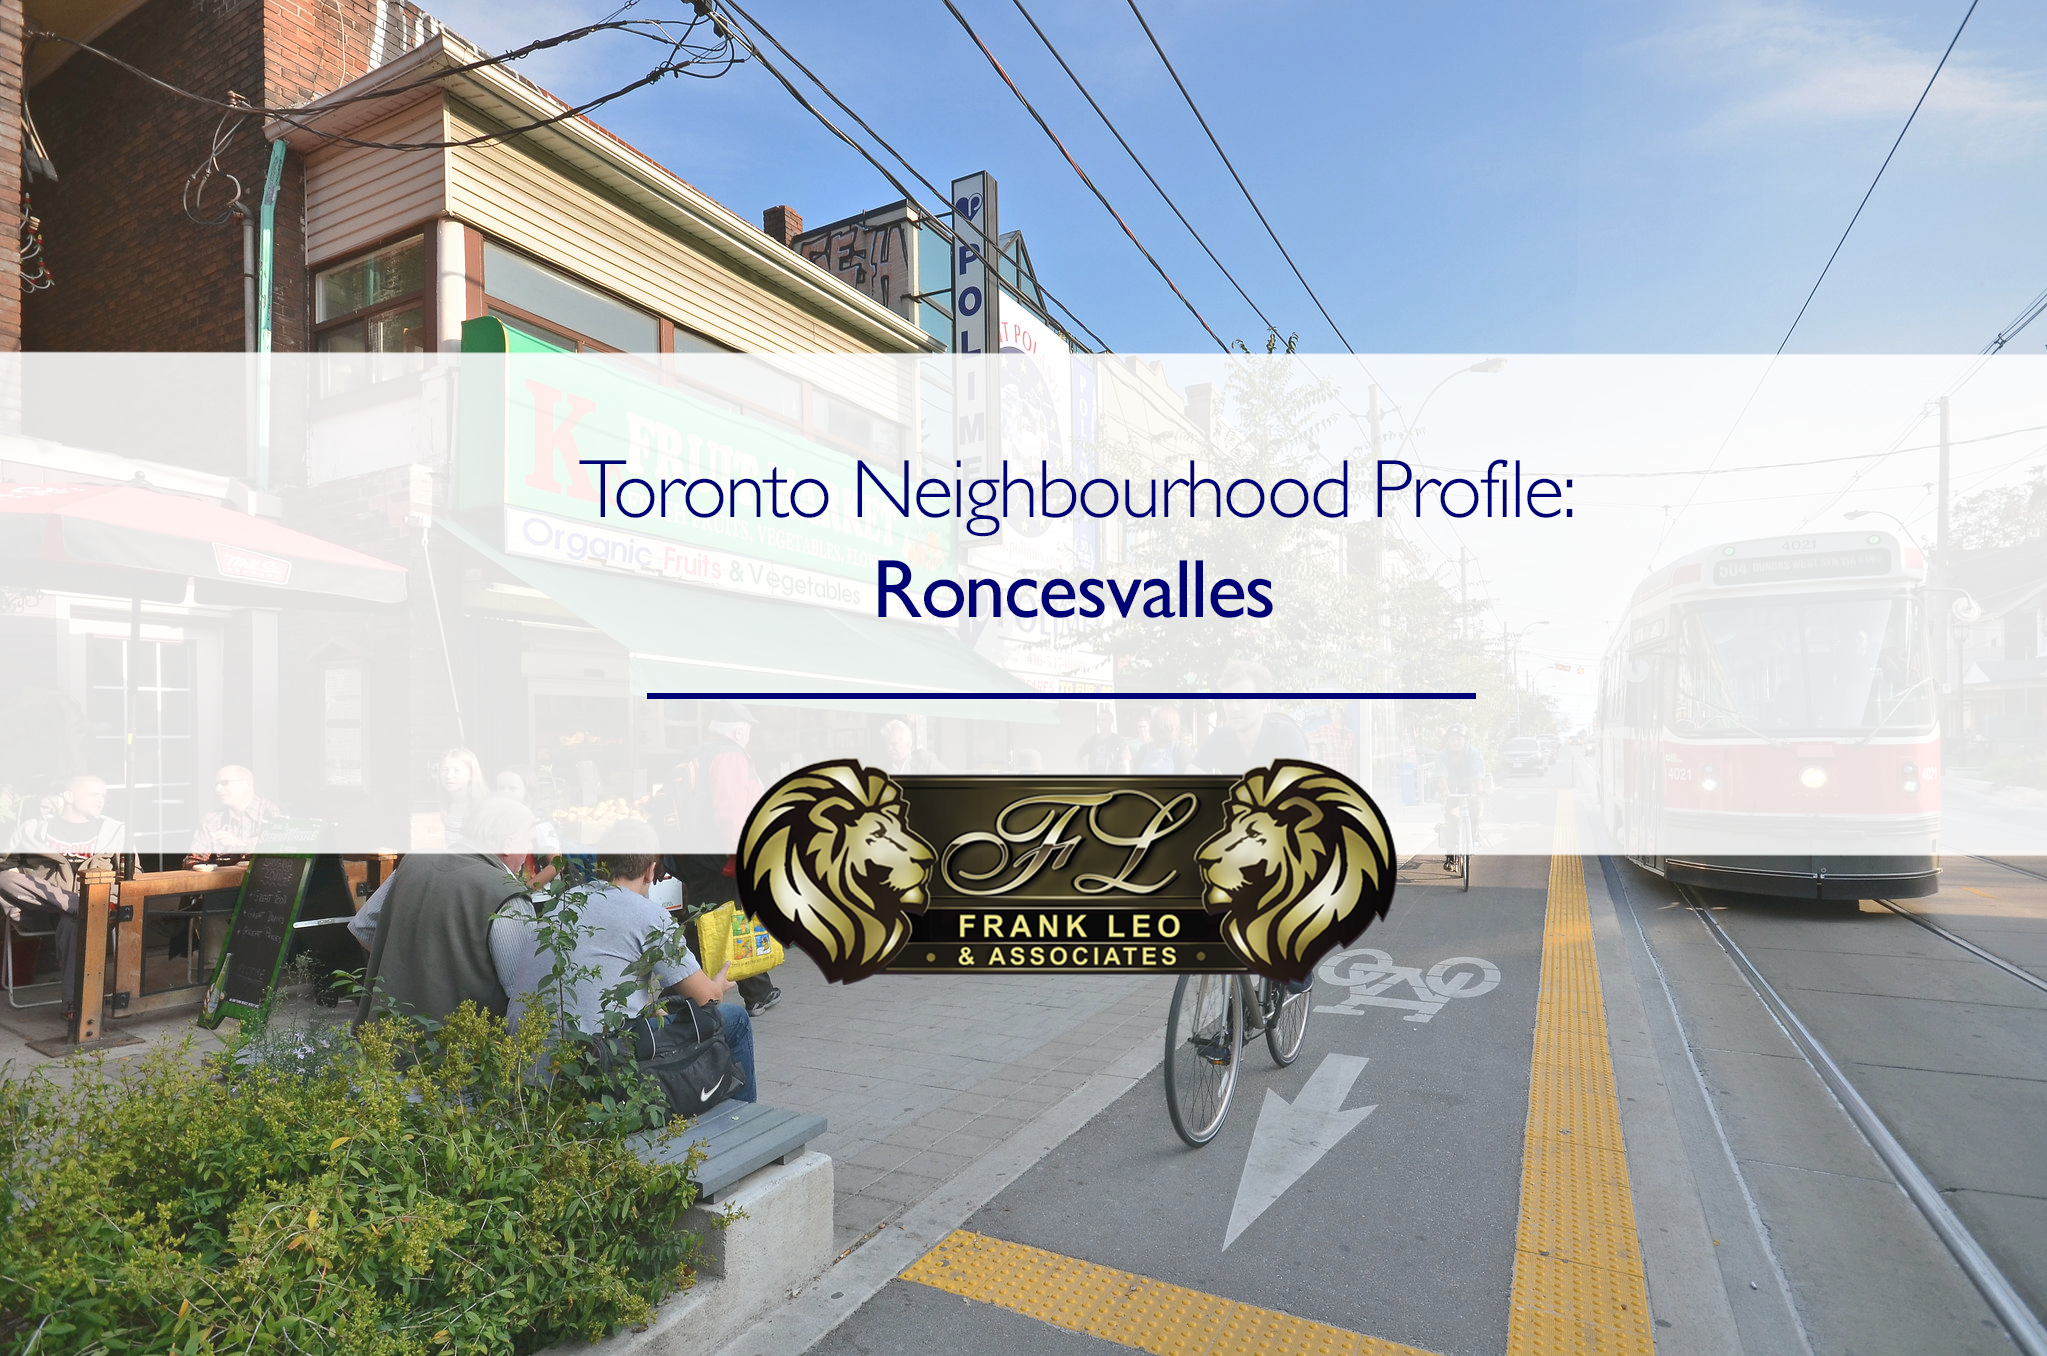 An image of roncesvalles ave in Toronto overlaid with the Text "Toronto Neighbourhood Profile: Roncesvalles"